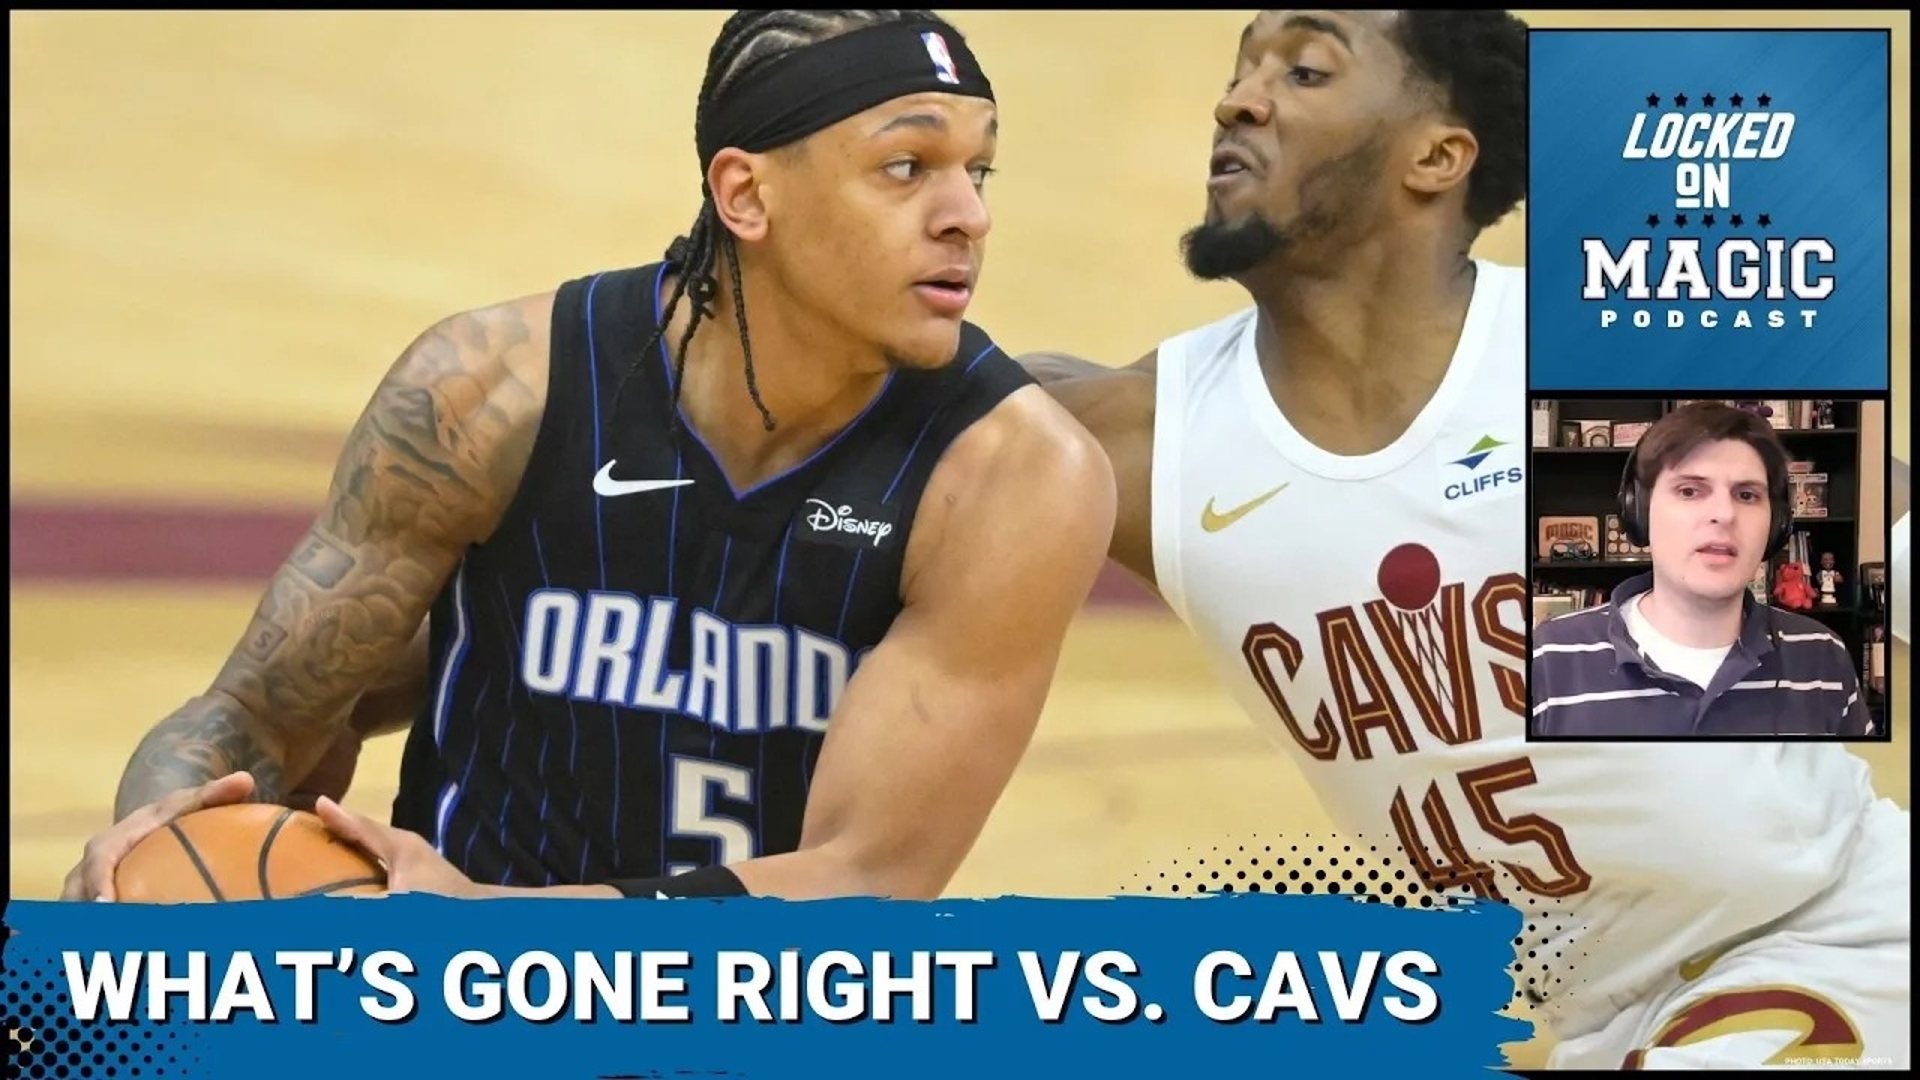 The Orlando Magic are struggling to get traction and get back into the series against the Cleveland Cavaliers.